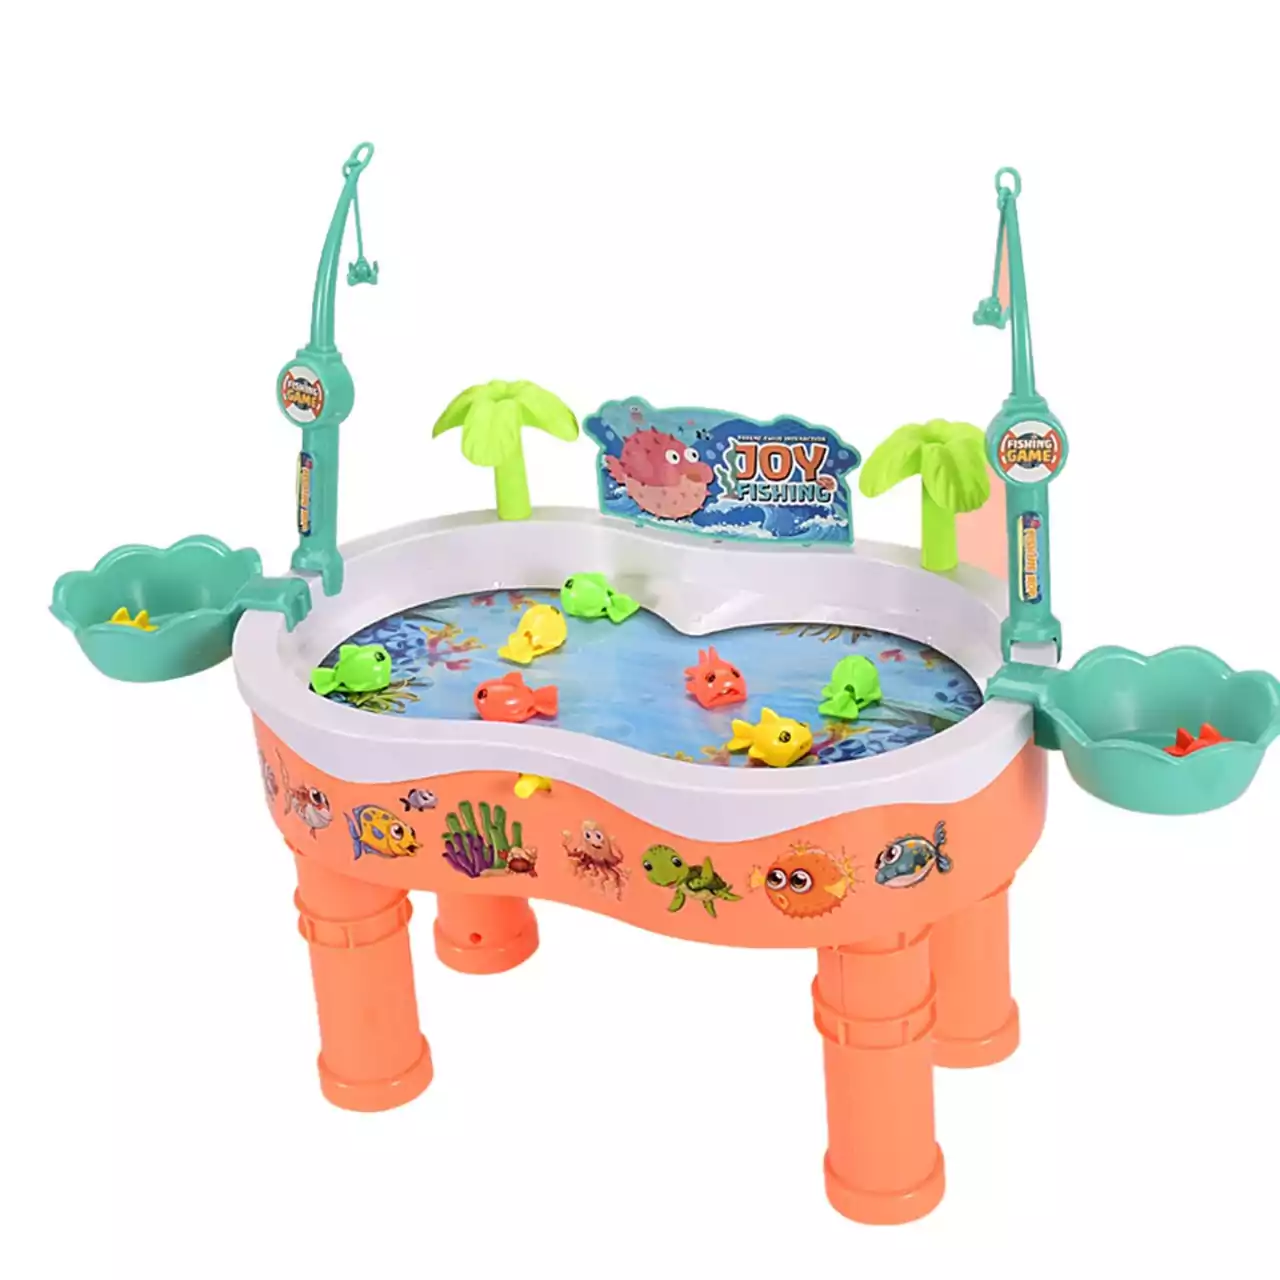 Paradise Magnetic Fishing Pretend Play - Pink - Buy Educational Toys Online  - Odeez Toy Store